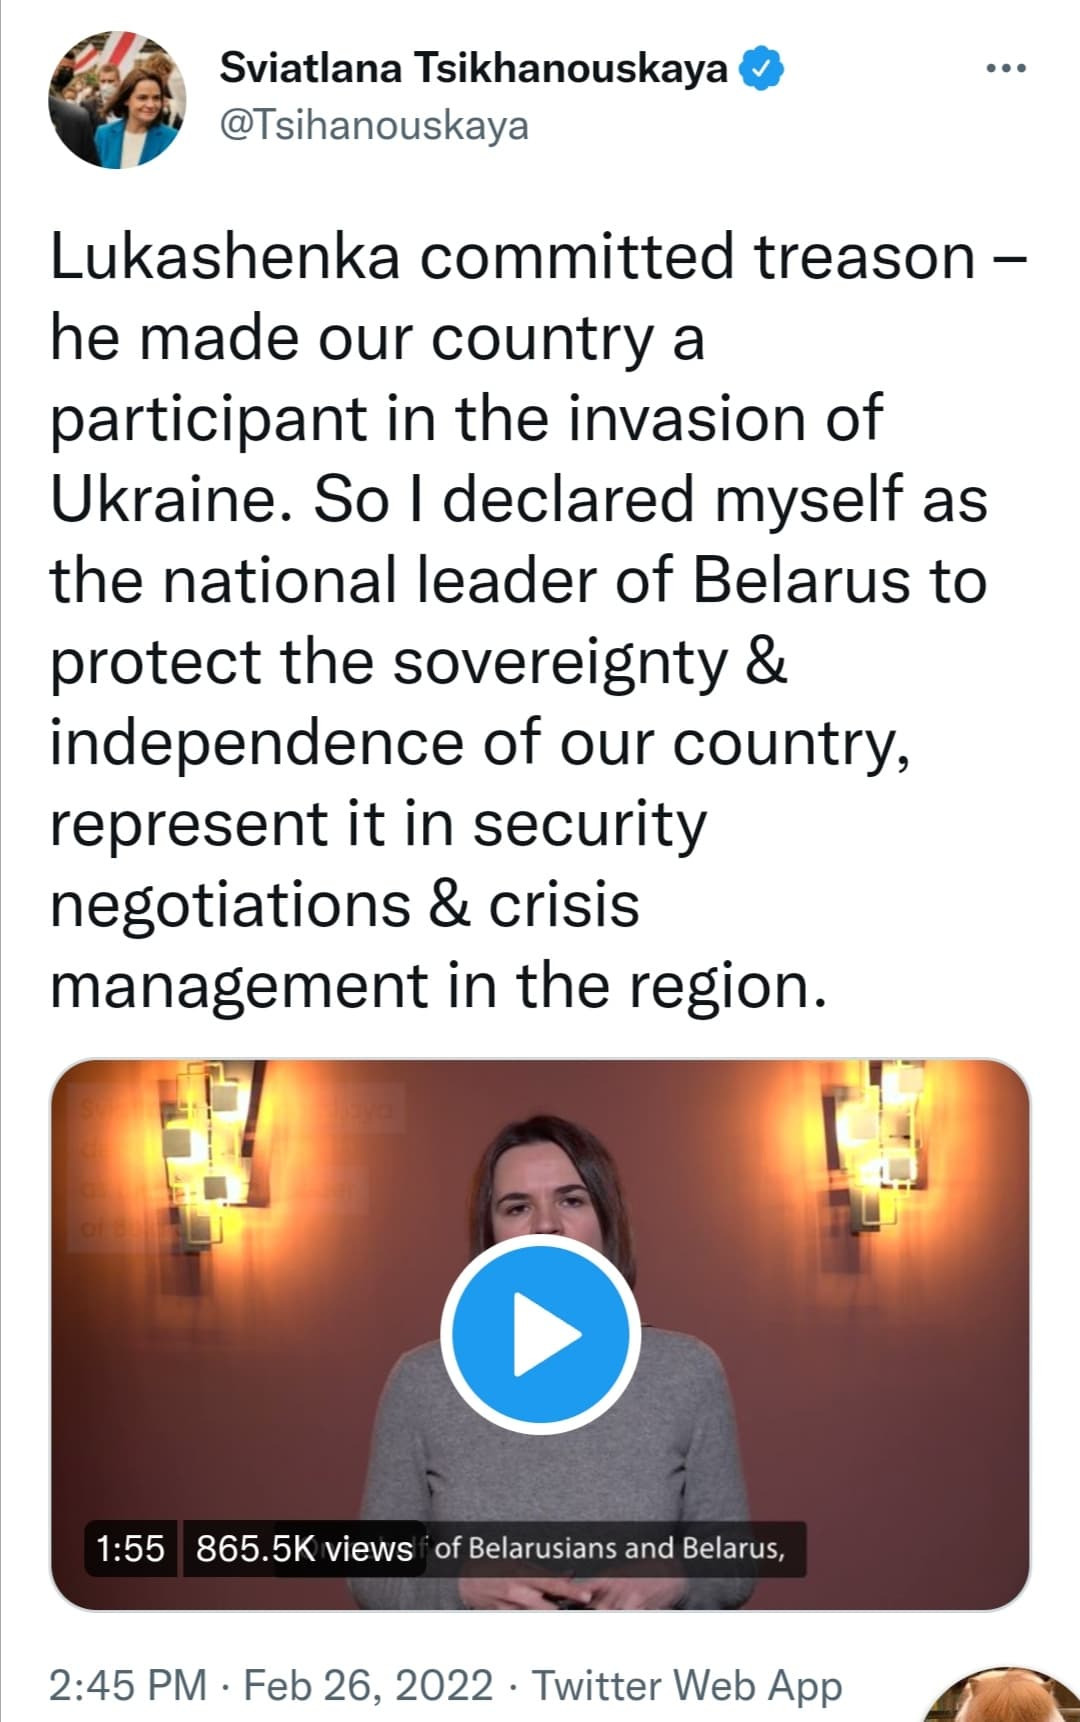 Tweet from Sviatlana Tsikhanouskaya reads: Lukashenka committed treason - he made our country a participant in the invasion of Ukraine. So I declared myself as the national leader of Belarus to protect the sovereignty & independence of our country, represent it in security negotiations & crisis management in the region